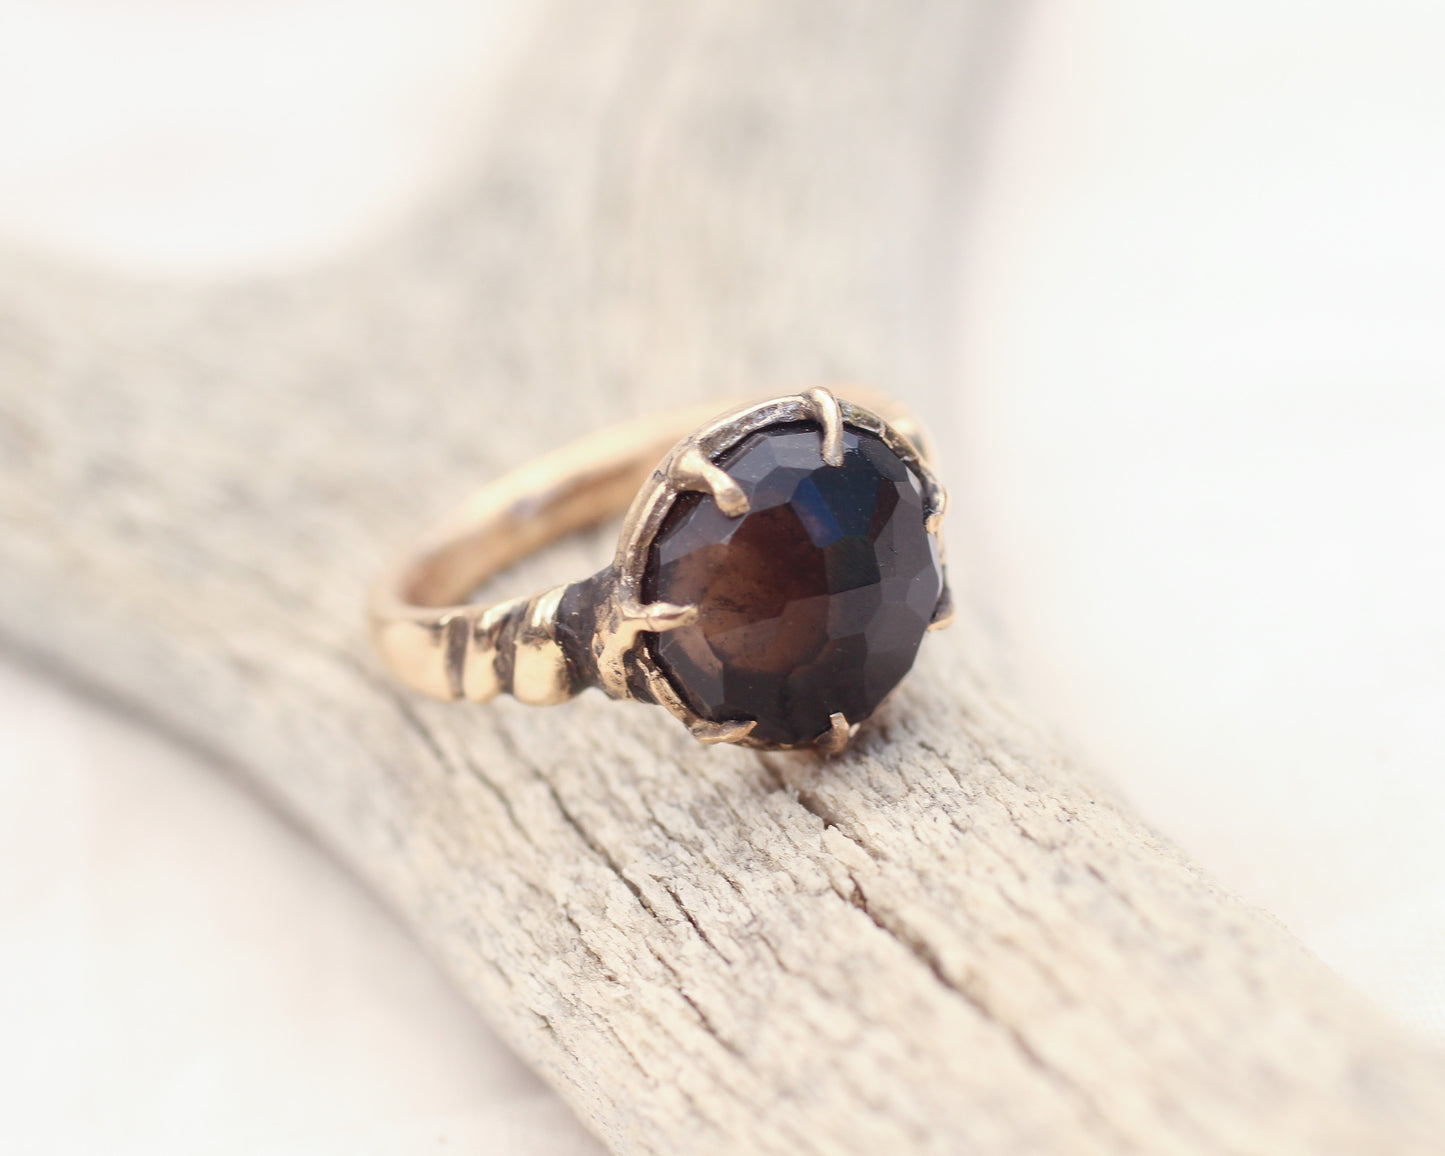 Hand Faceted Morion Smoky Quartz ring - Size 6.5